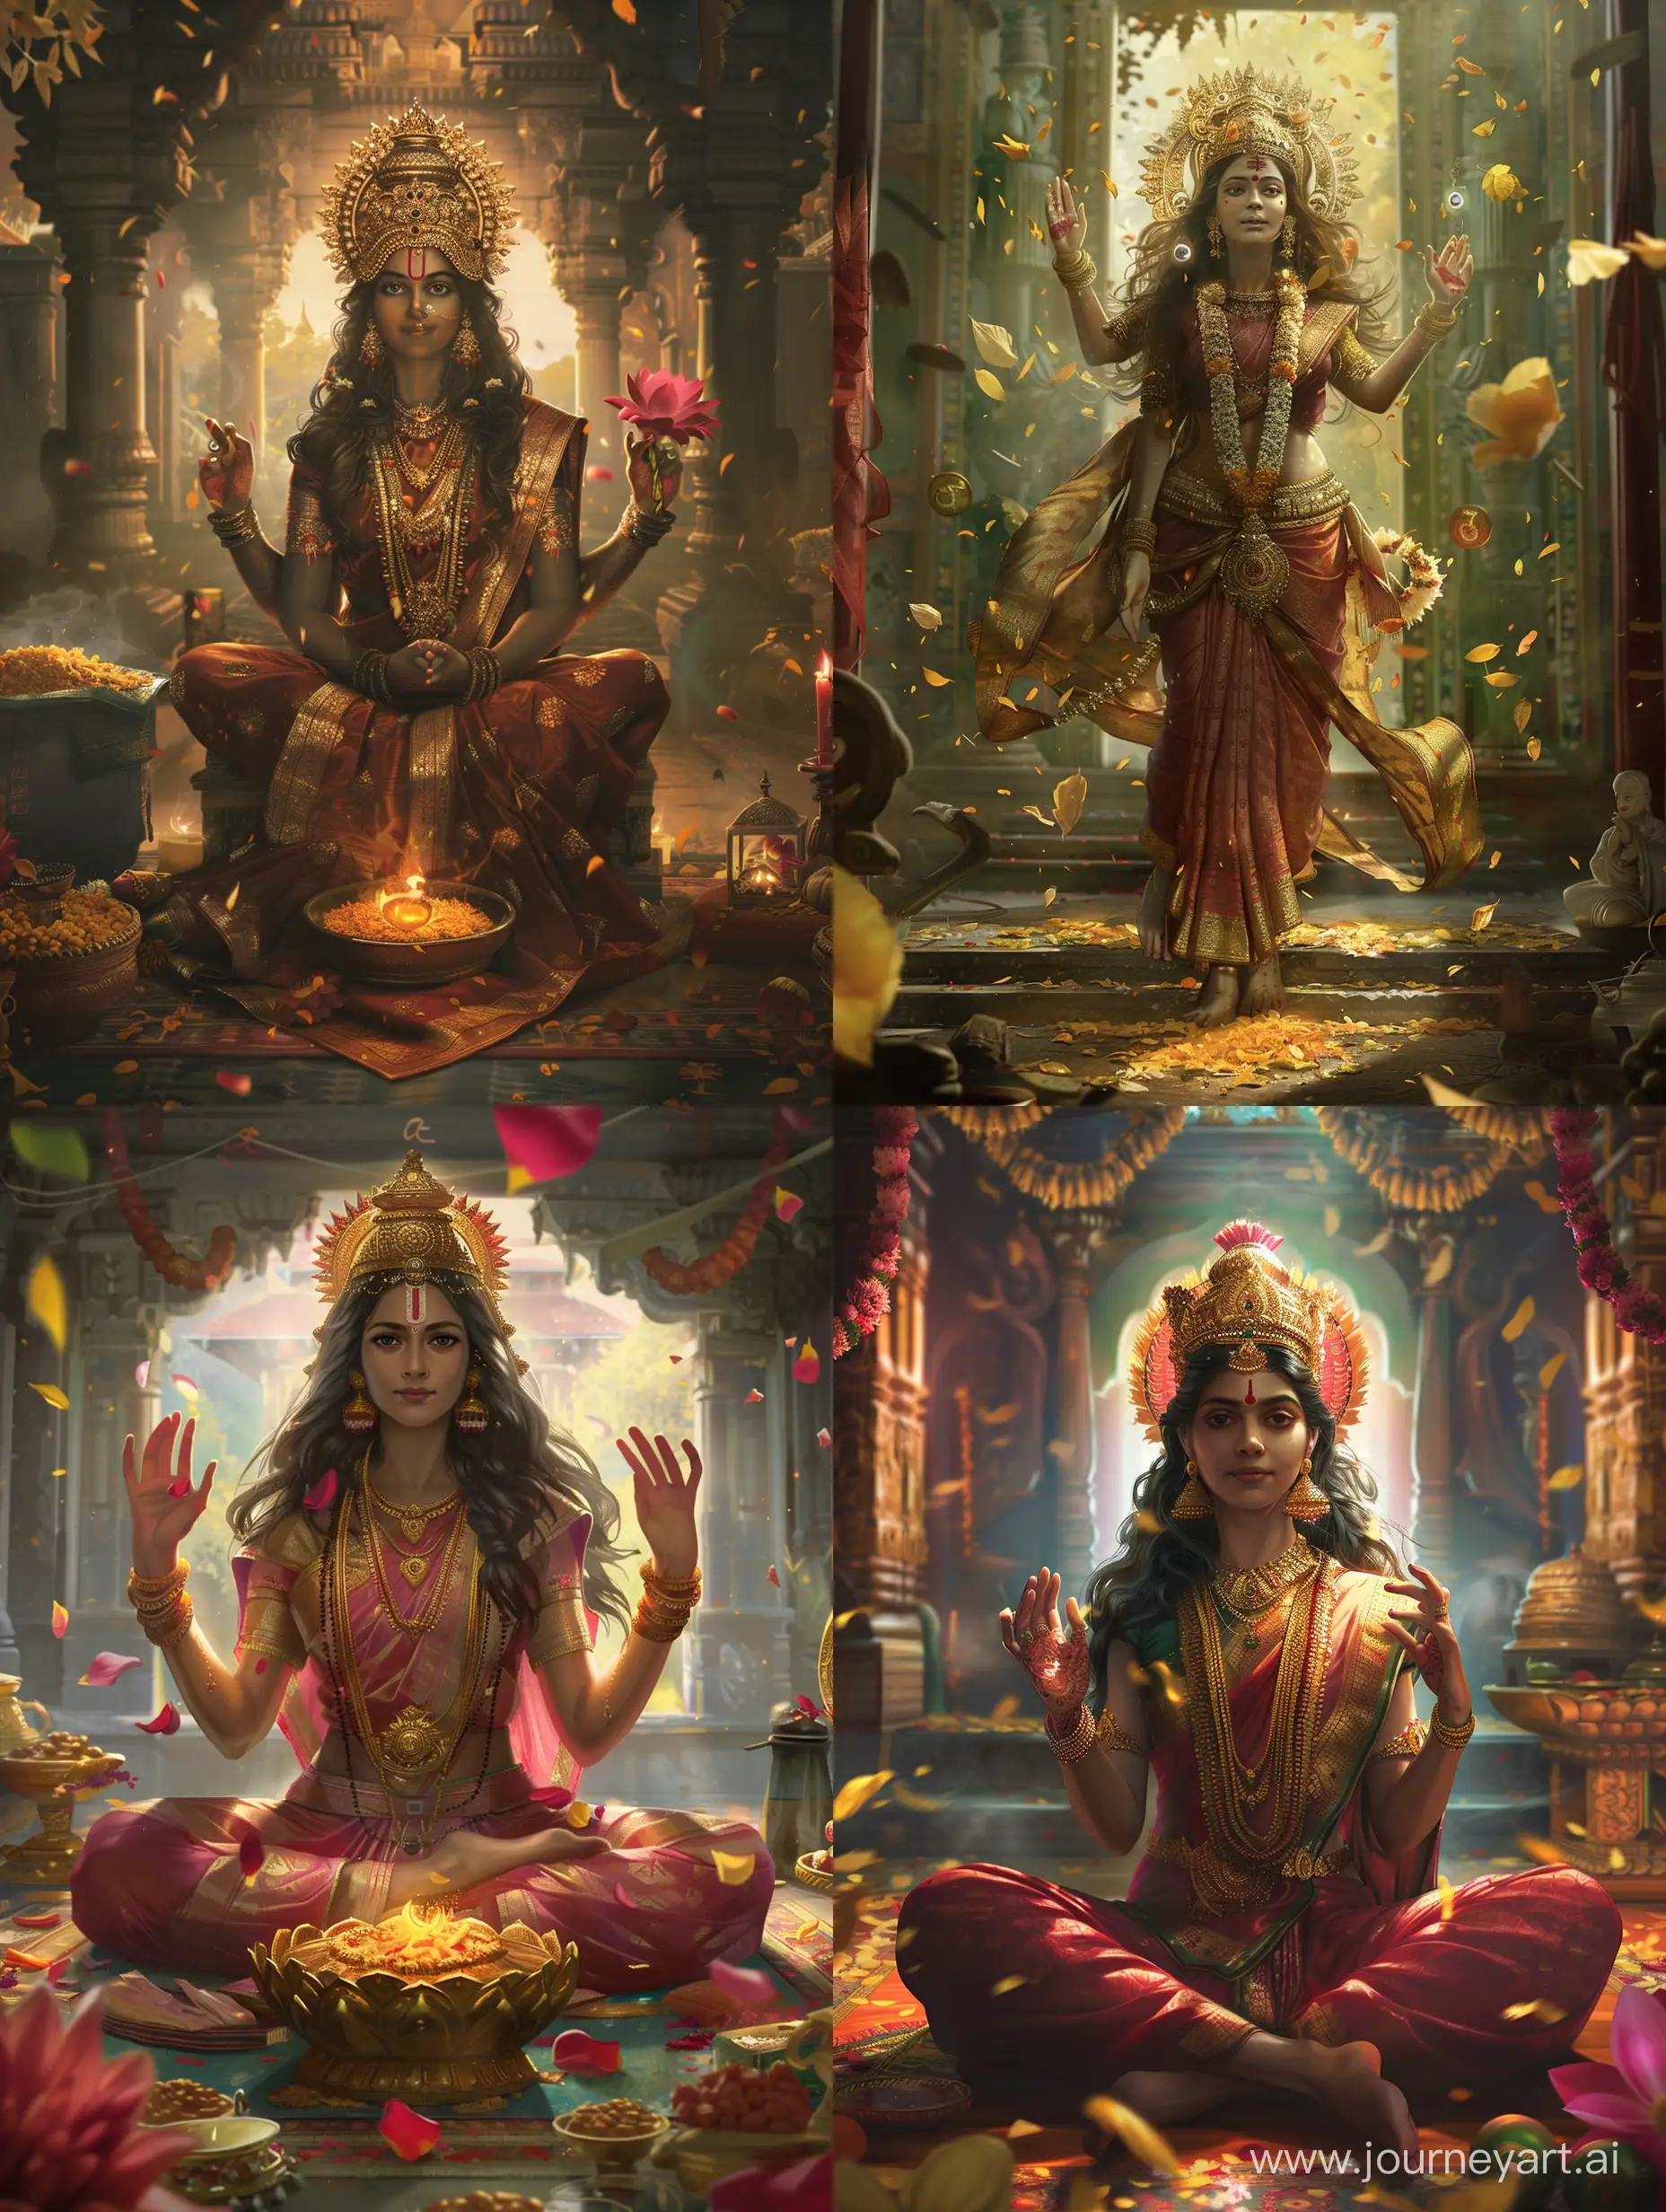 a depiction of Goddess Lakshmi that embodies the concept of wealth beyond material possessions. How would you visually convey abundance, prosperity, and financial well-being through her form, attributes, or surroundings